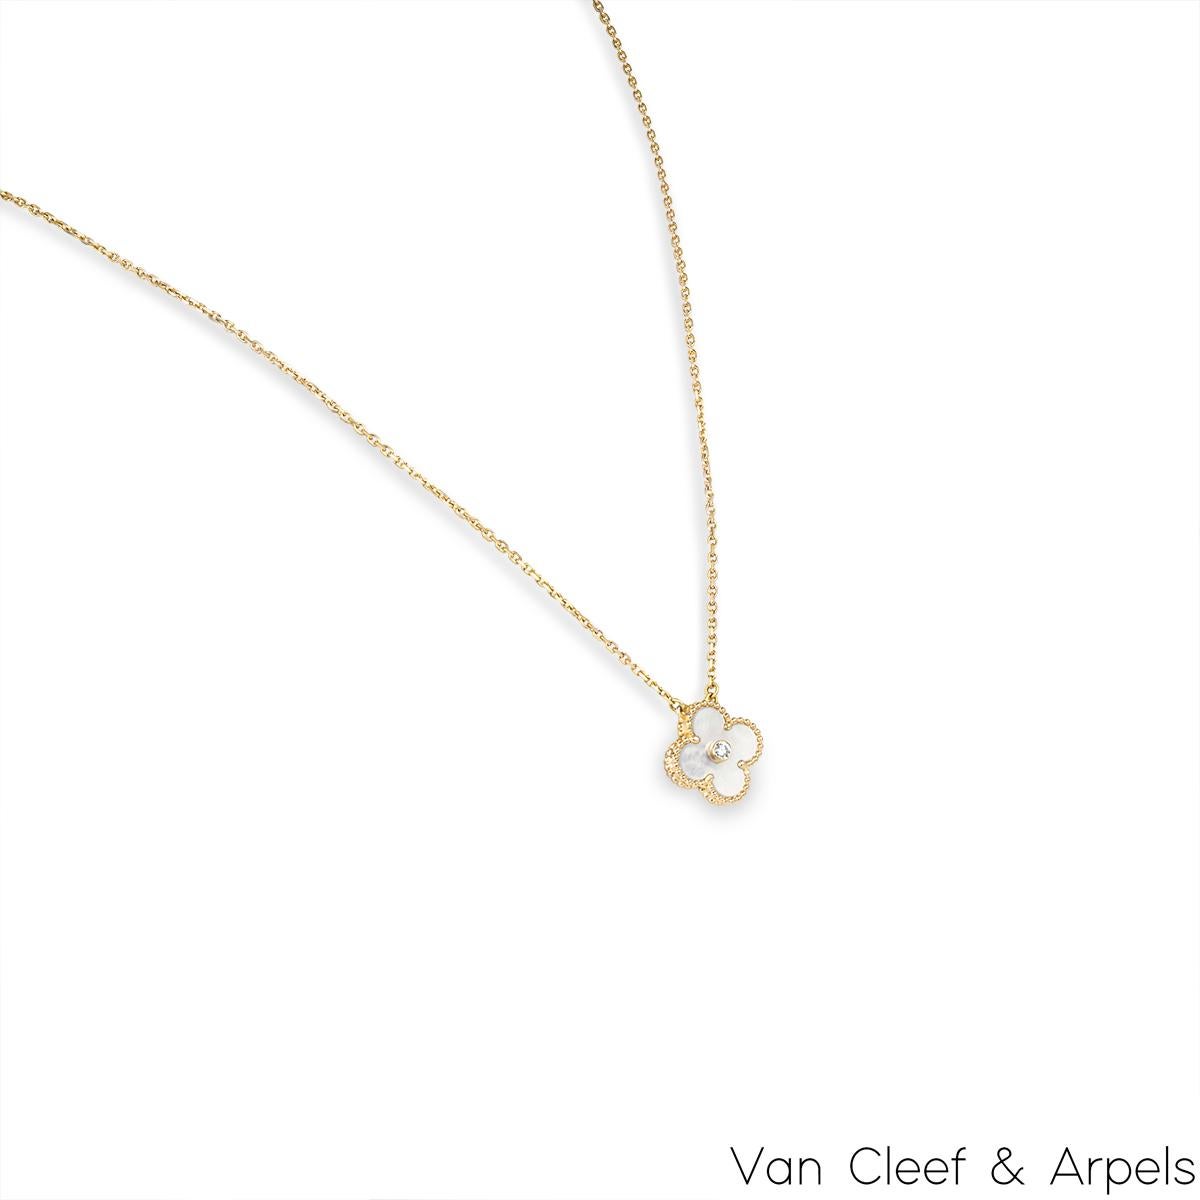 A limited edition 18k rose gold mother of pearl and diamond Van Cleef & Arpels Vintage Alhambra pendant from the 2012 Holiday collection. The pendant features a beaded edge 4 leaf clover motif with a mother of pearl inlay. Further complementing the